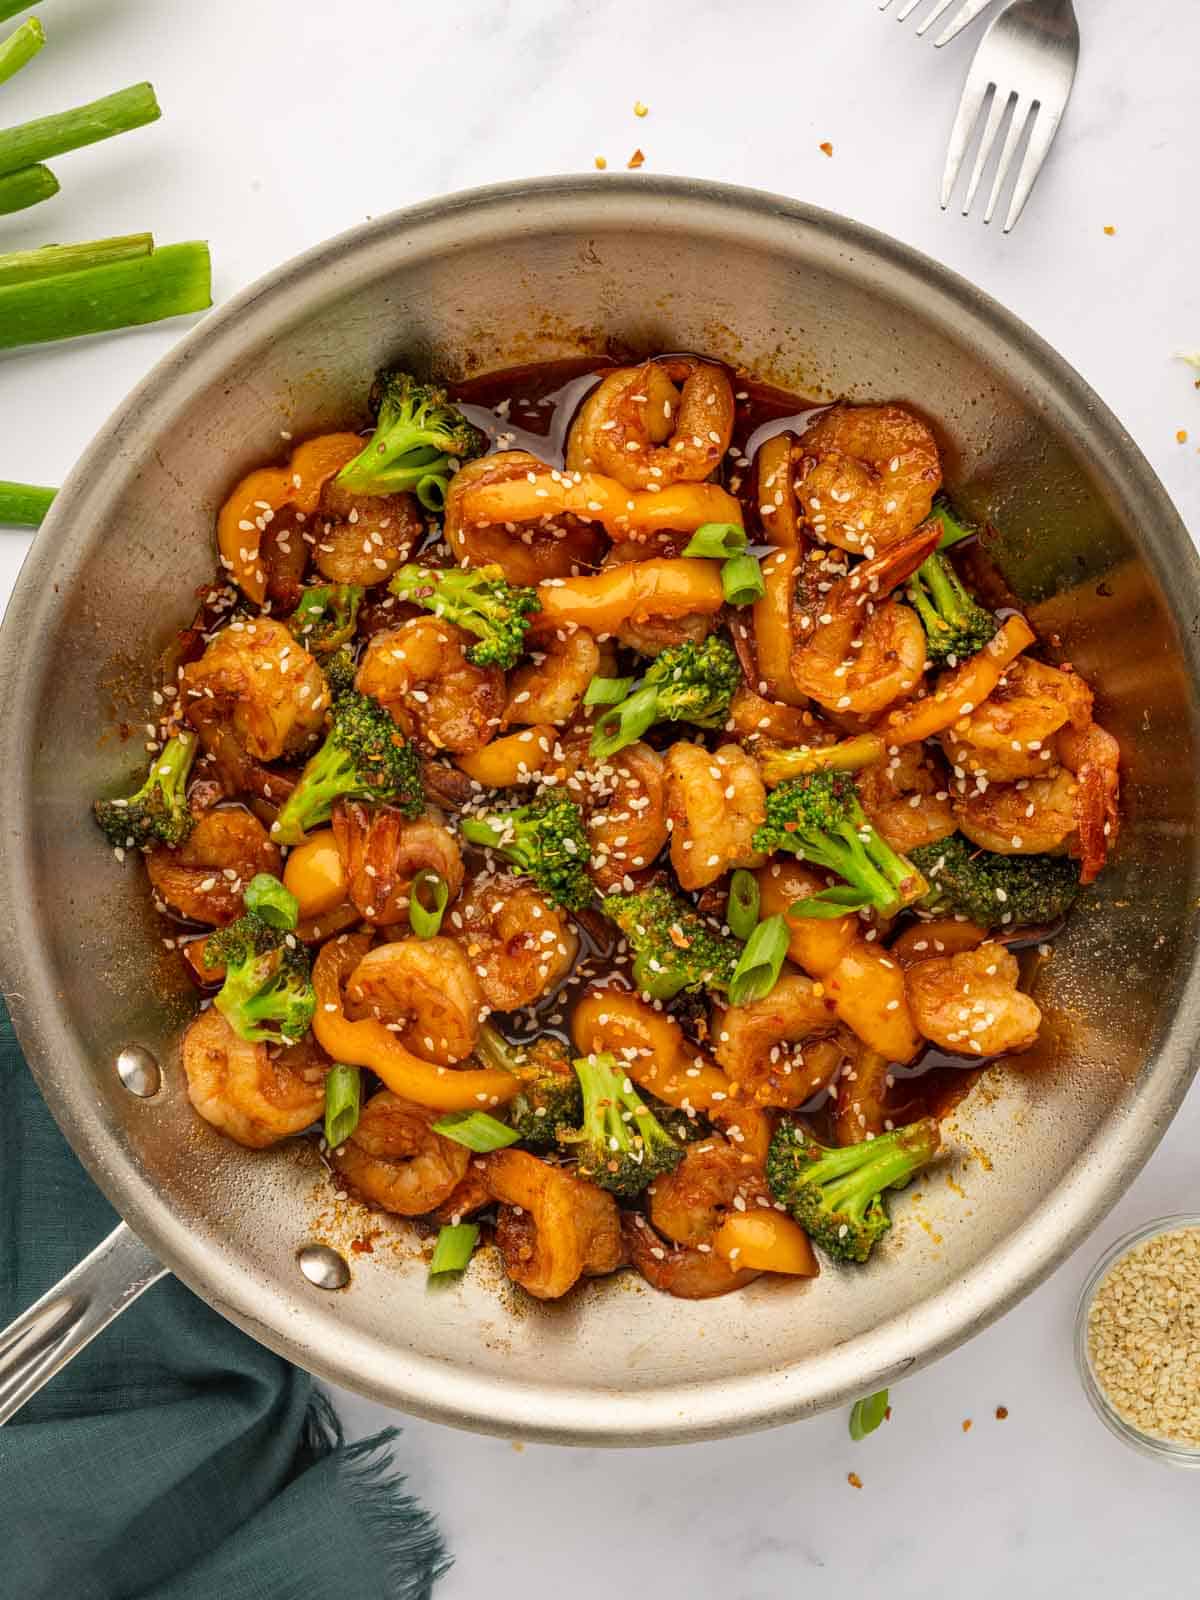 Sweet chili shrimp in a skillet.